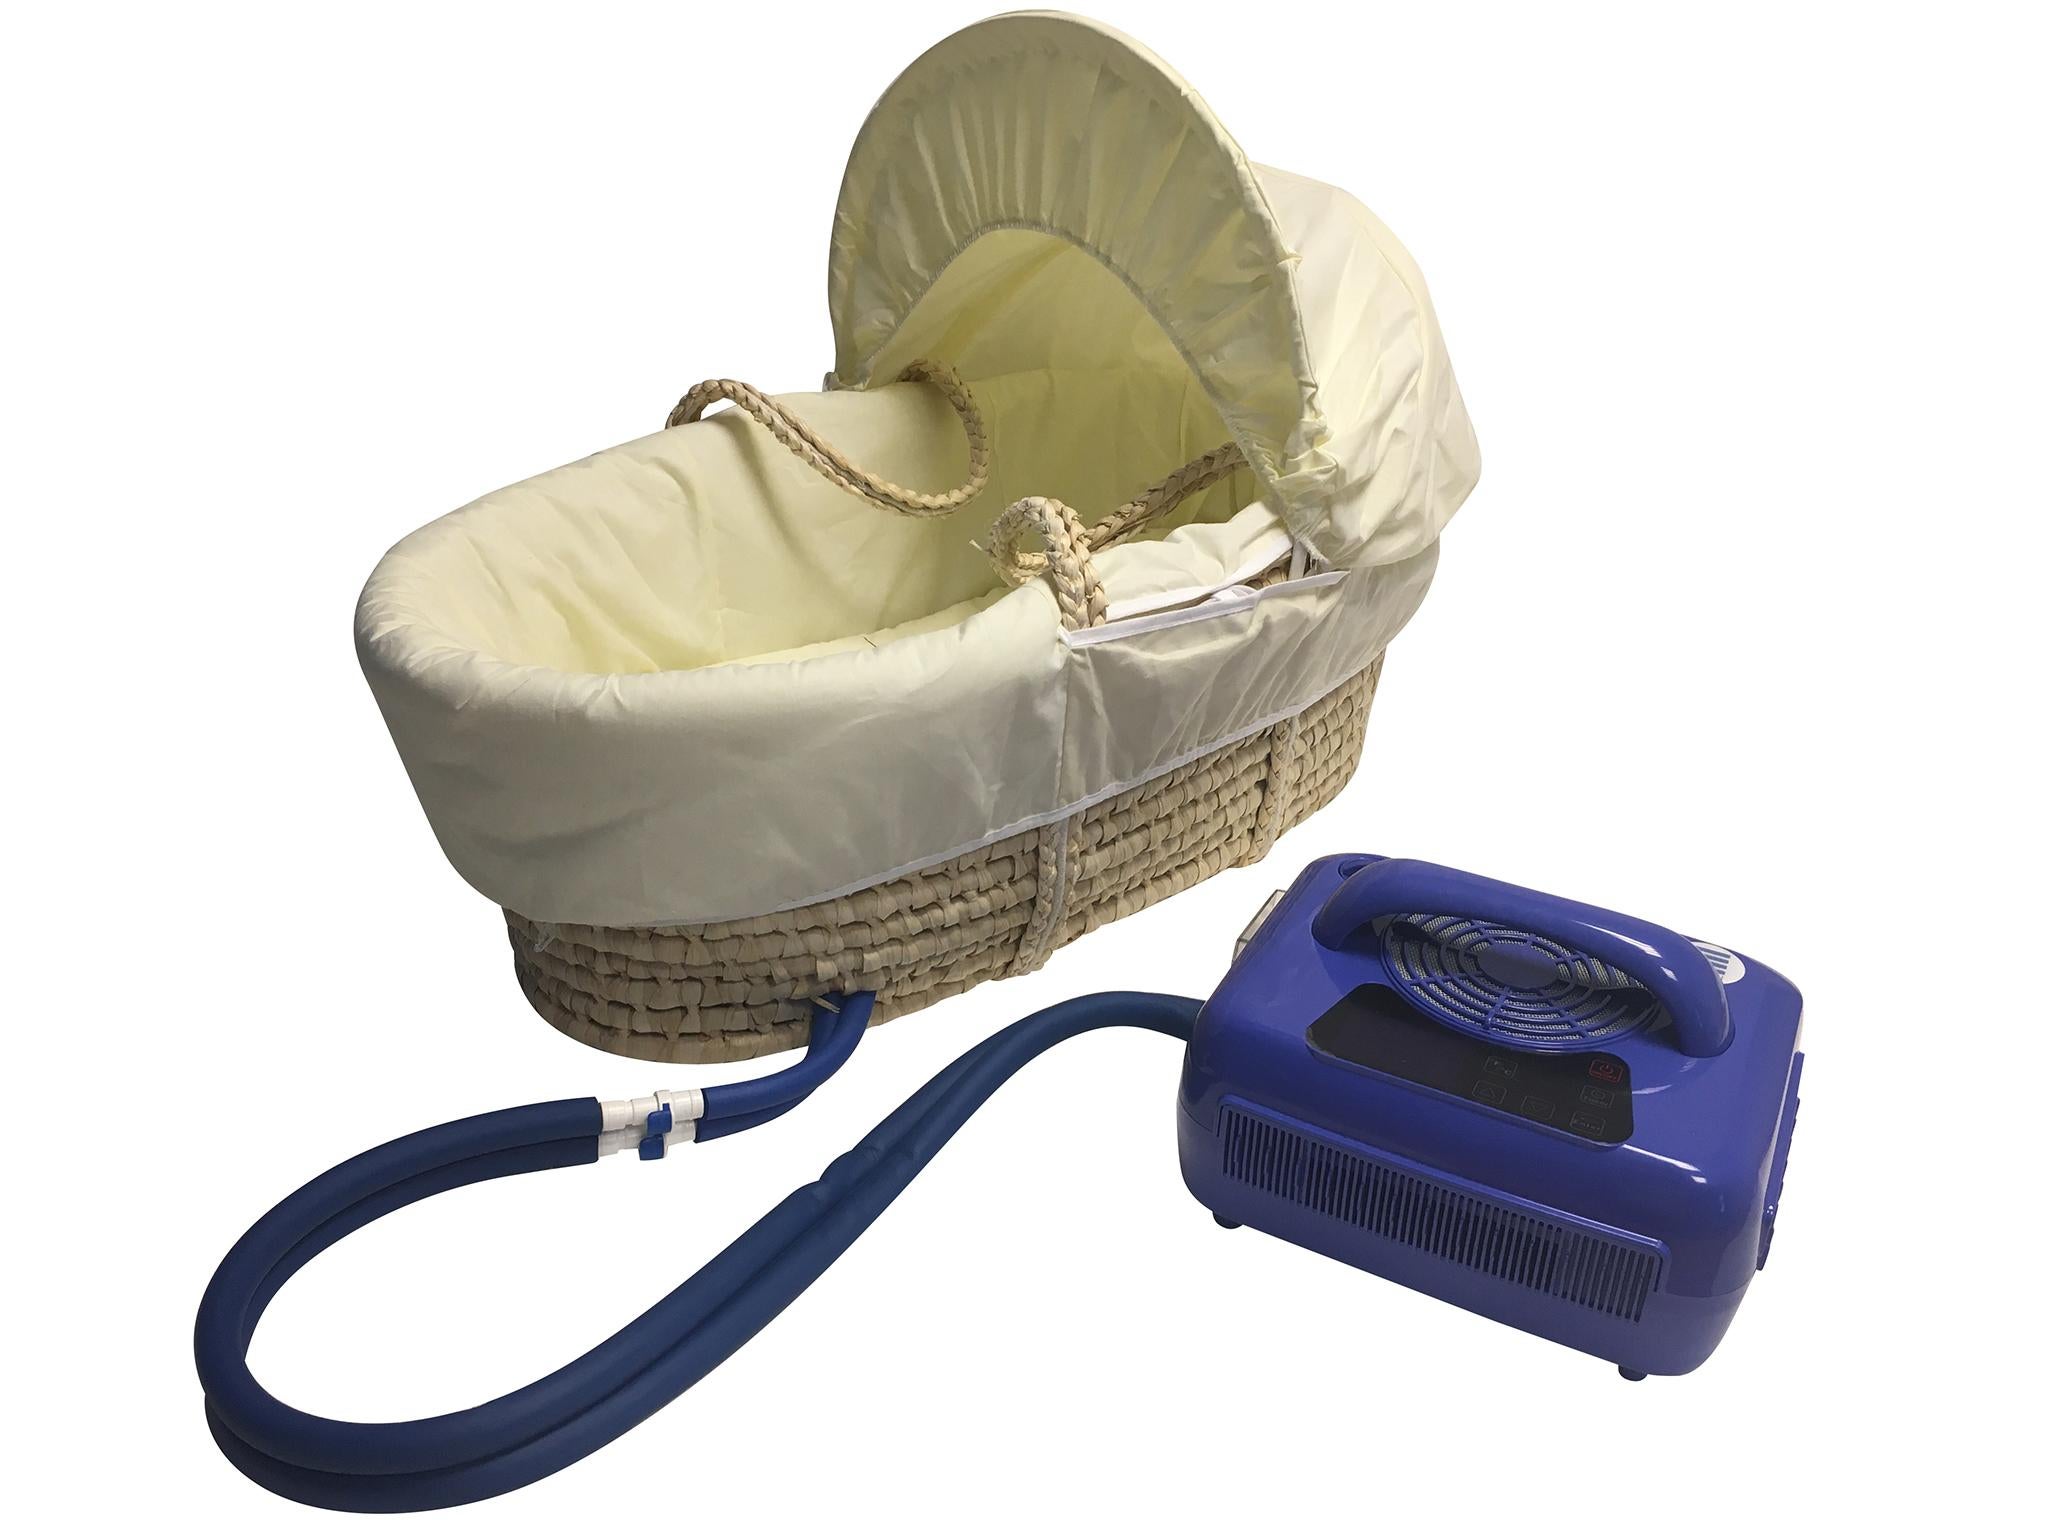 A Cuddlecot with a Moses basket